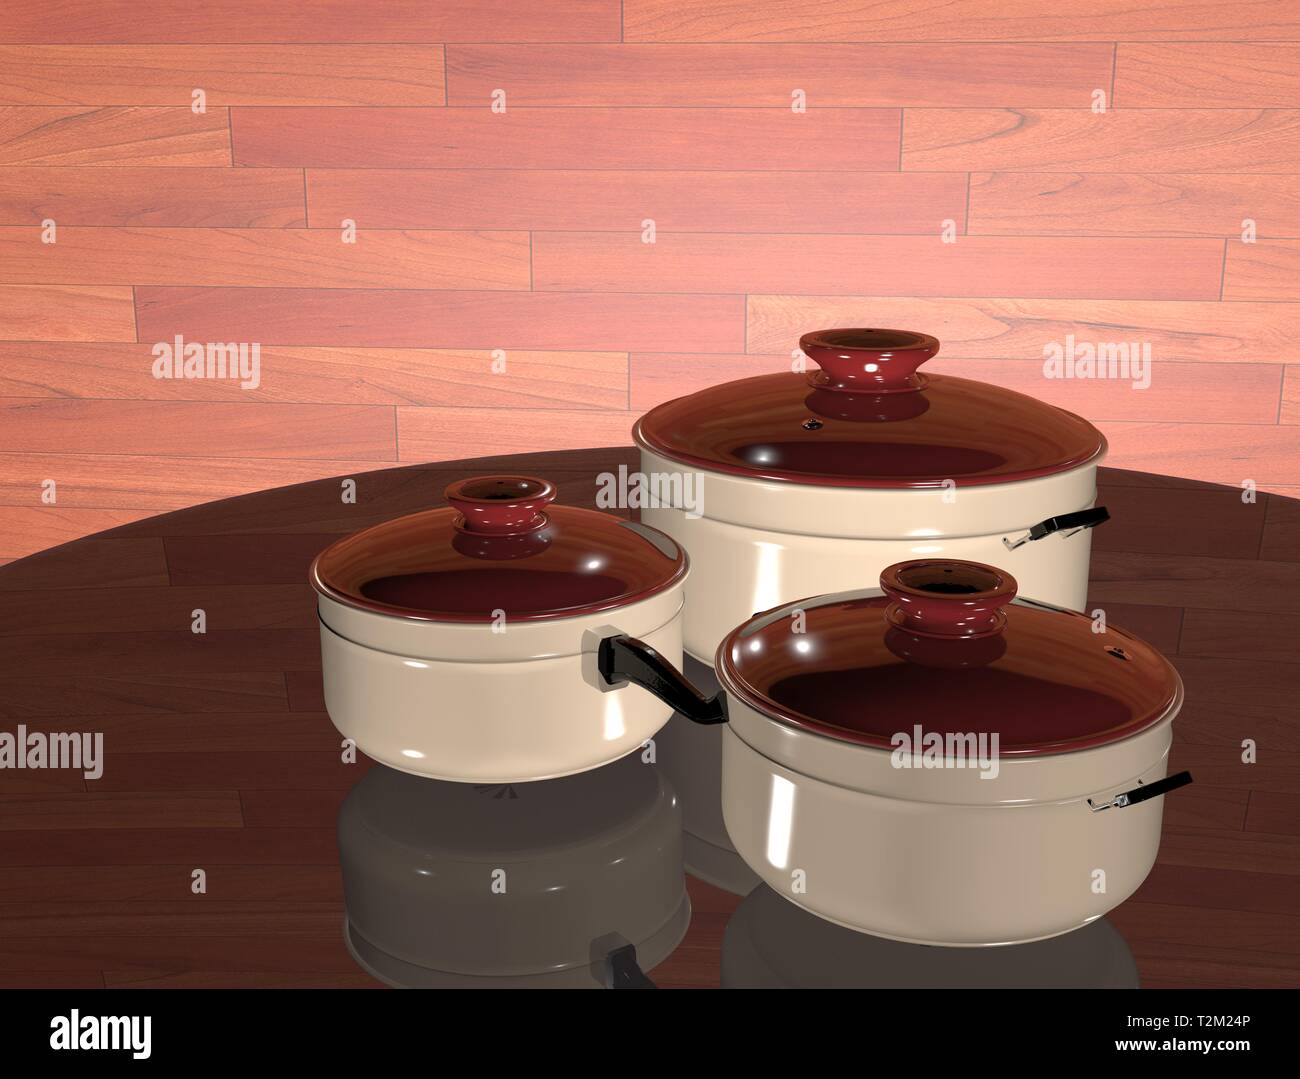 3d illustration of cookware used in home kitchen for various purposes Stock Photo